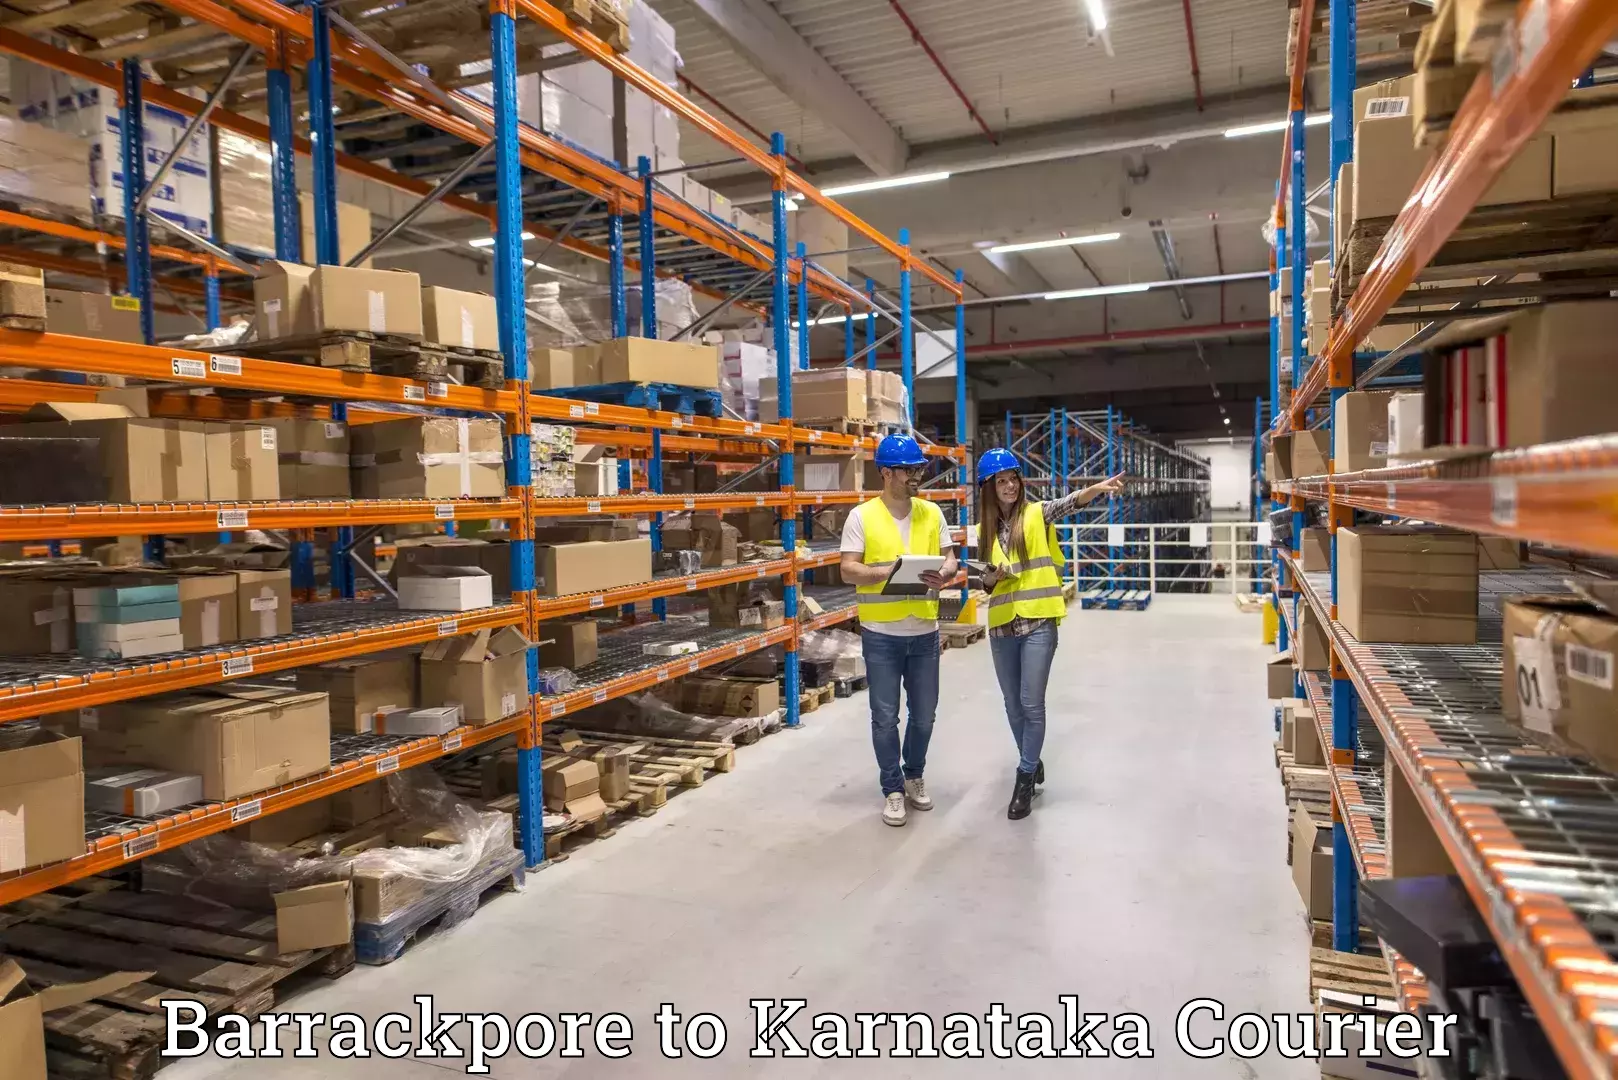 Courier service partnerships Barrackpore to Mandya